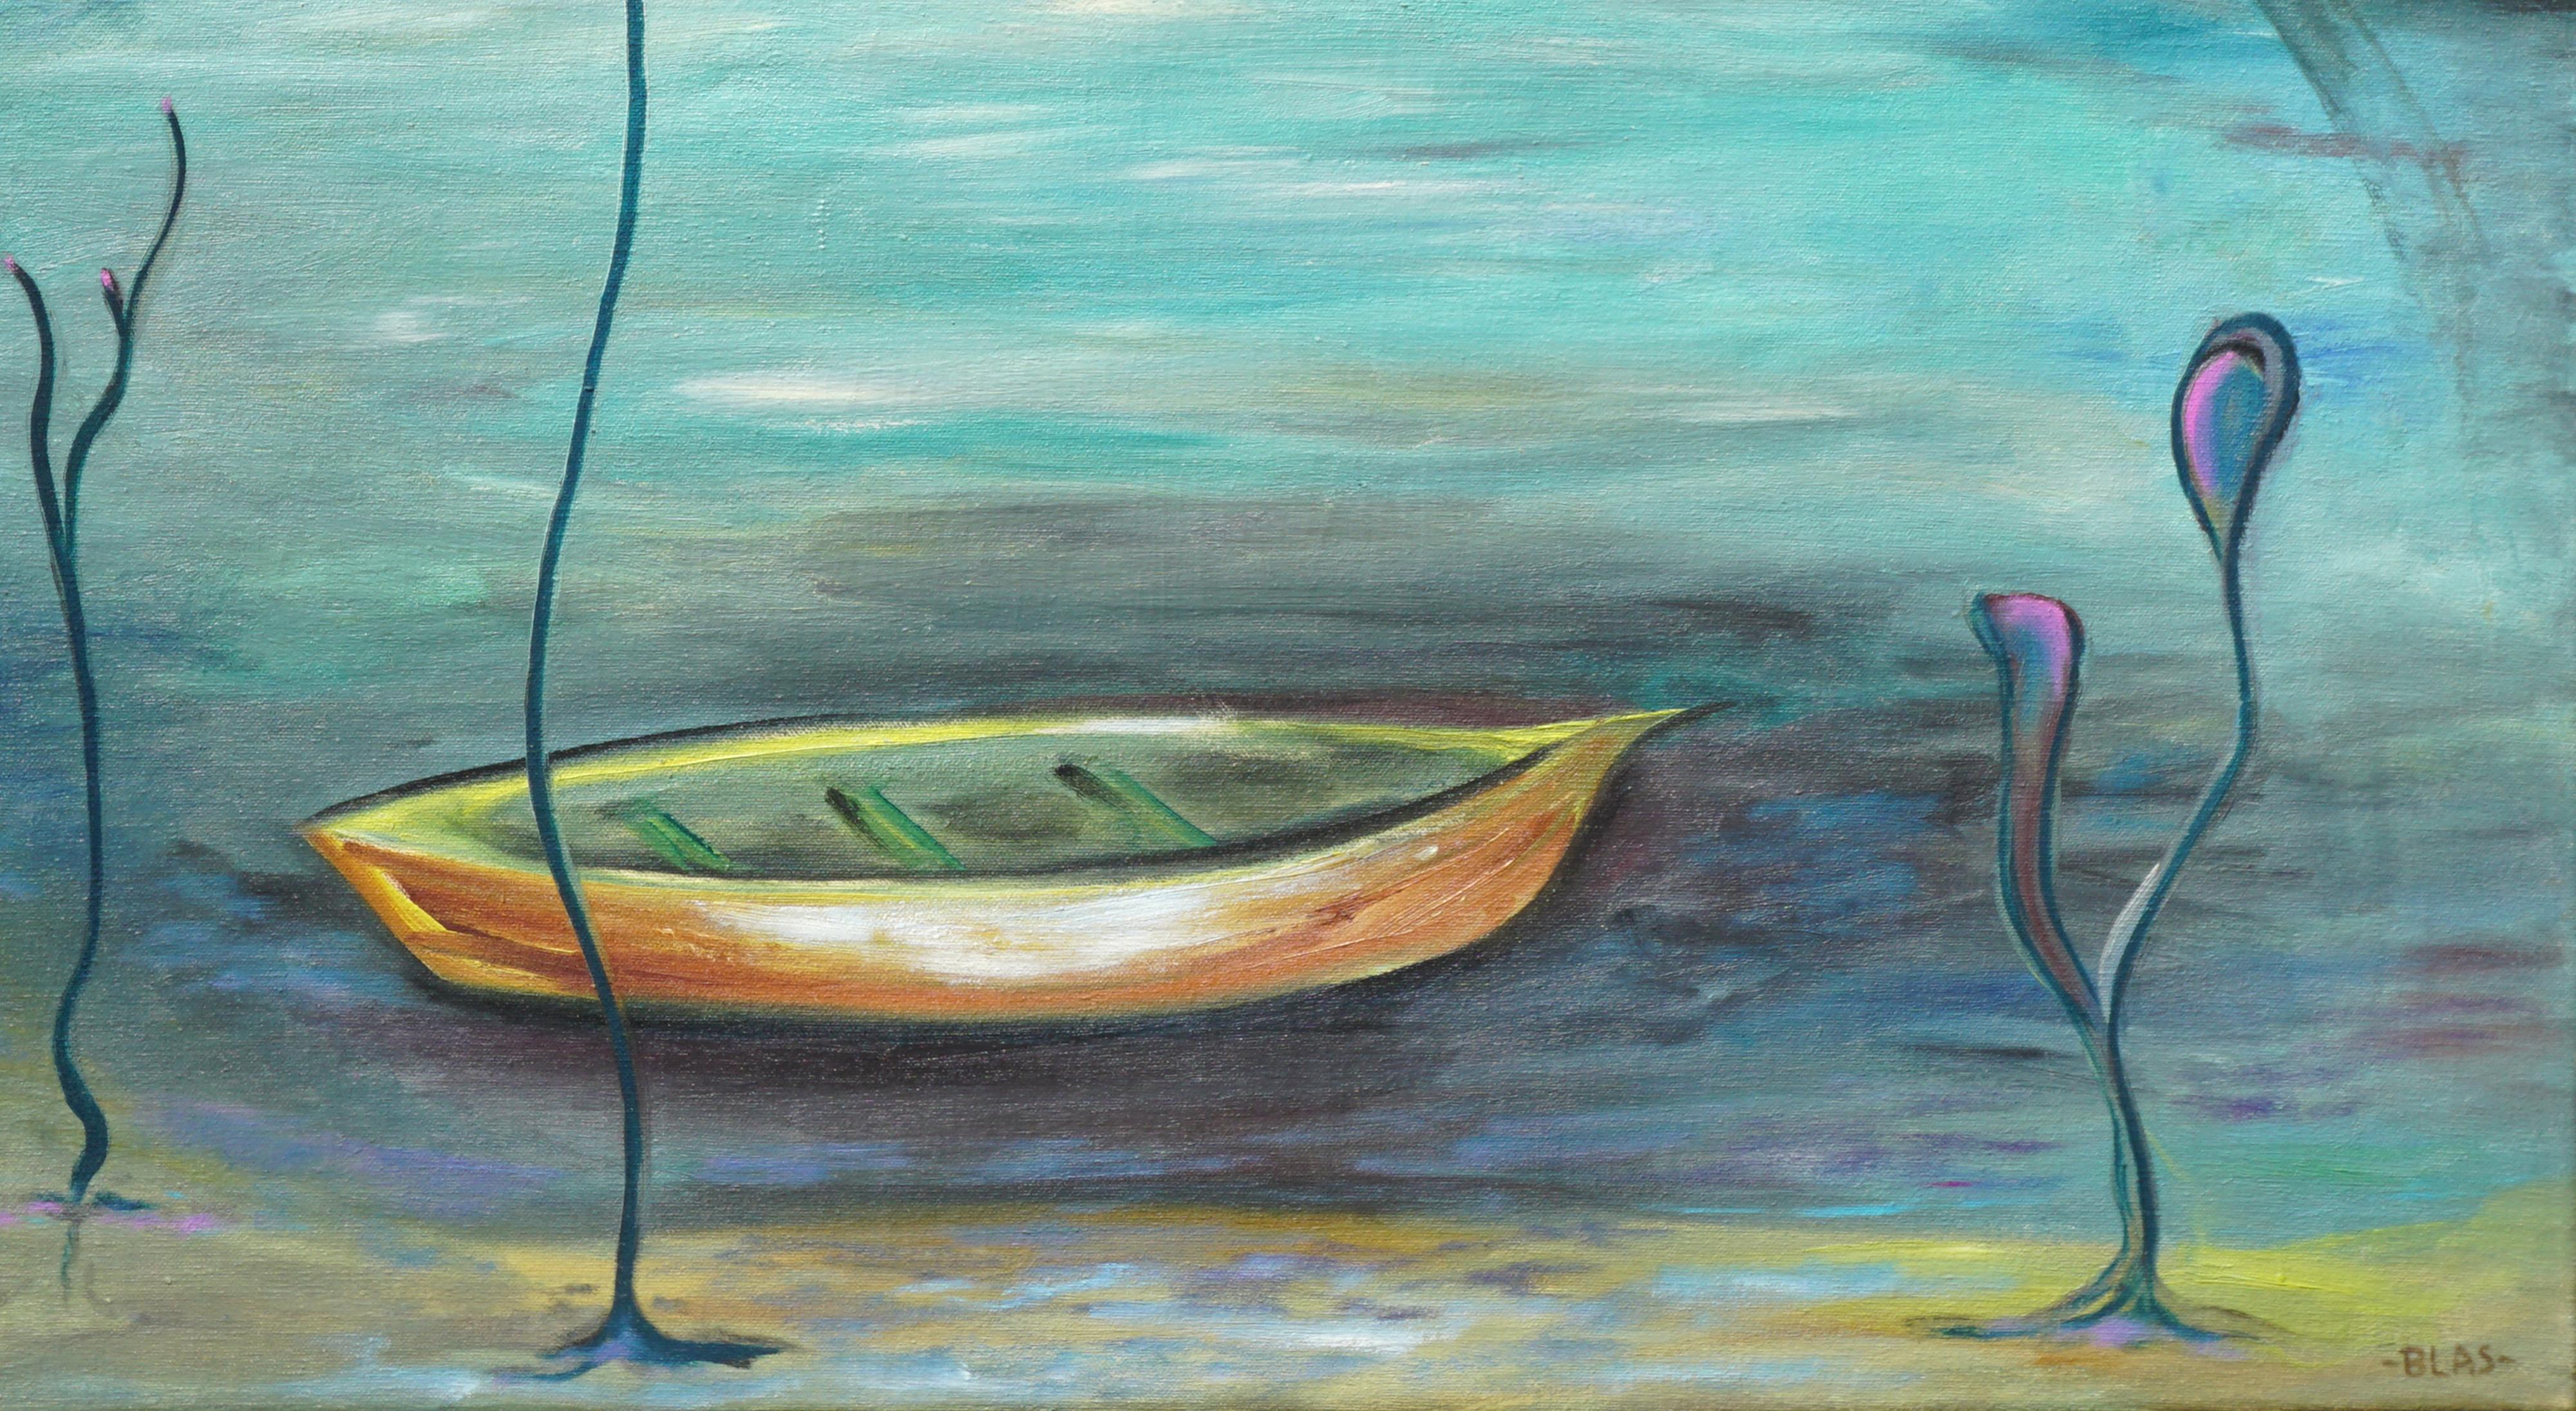 Life is But A Dream - Mid Century Hawaii Surreal Abstract Landscape with Boat - Painting by Marguerite Blasingame